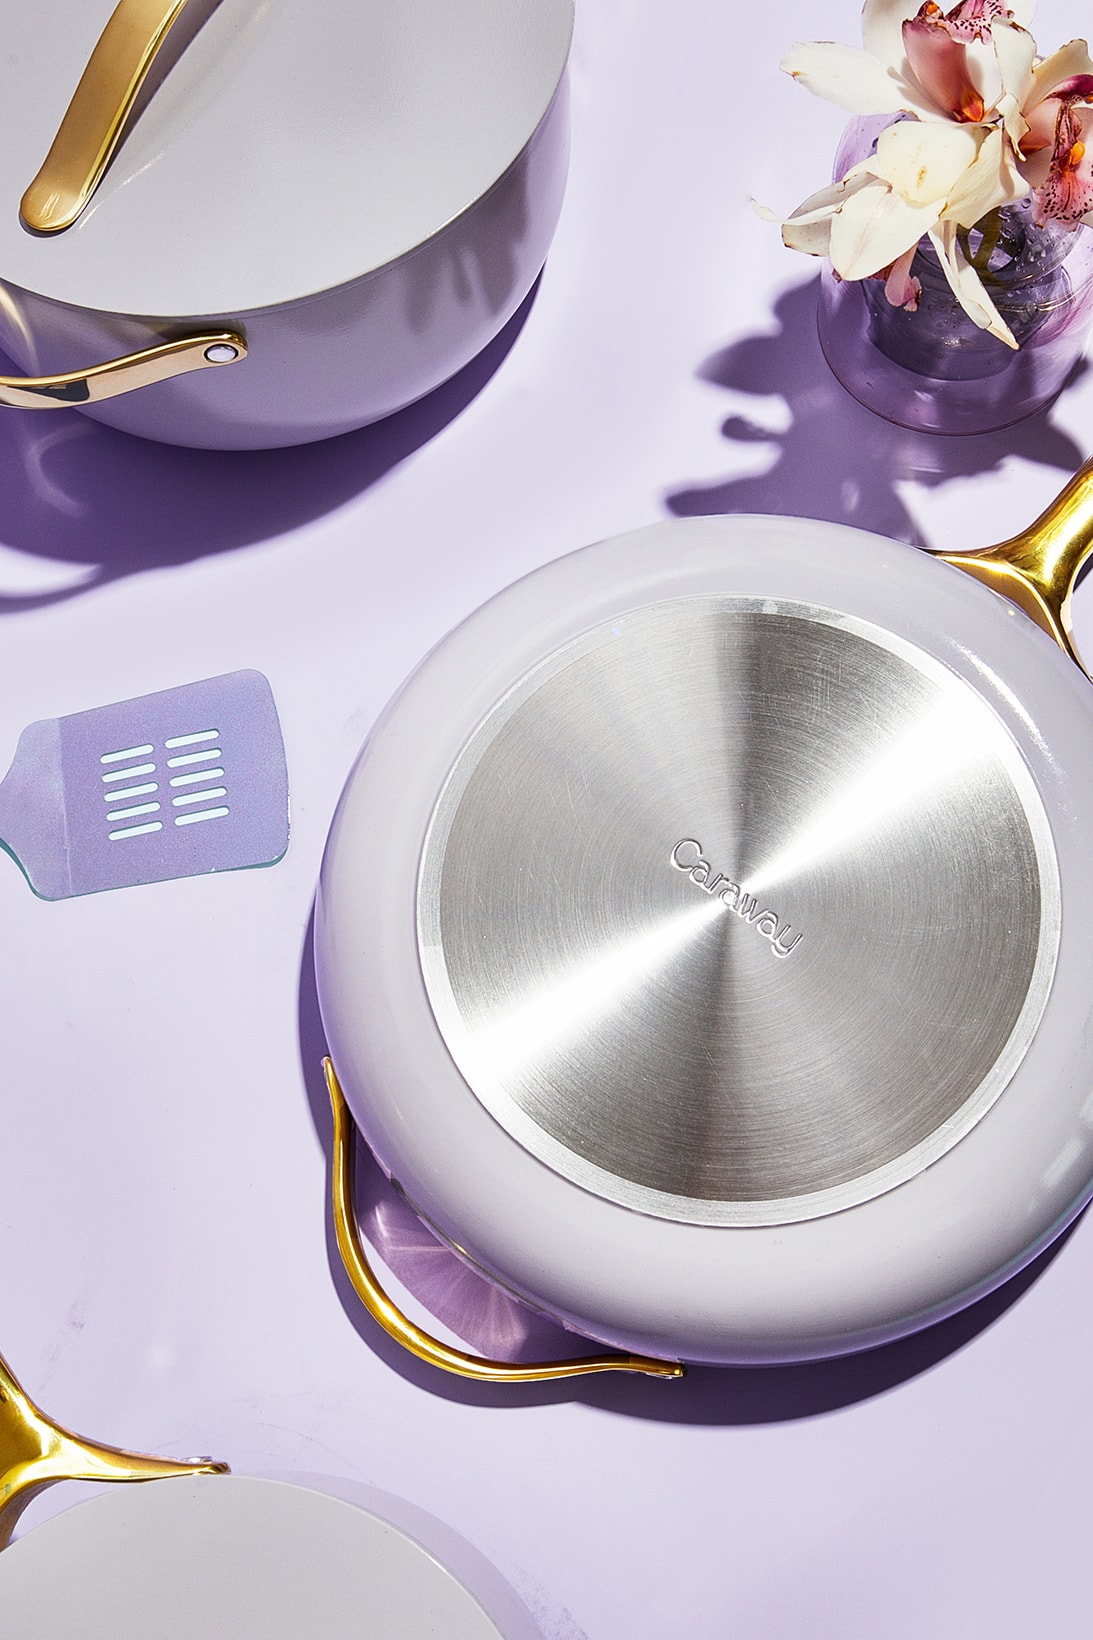 Your Cookware Will Get a Pastel Touch With Caraway's New Full